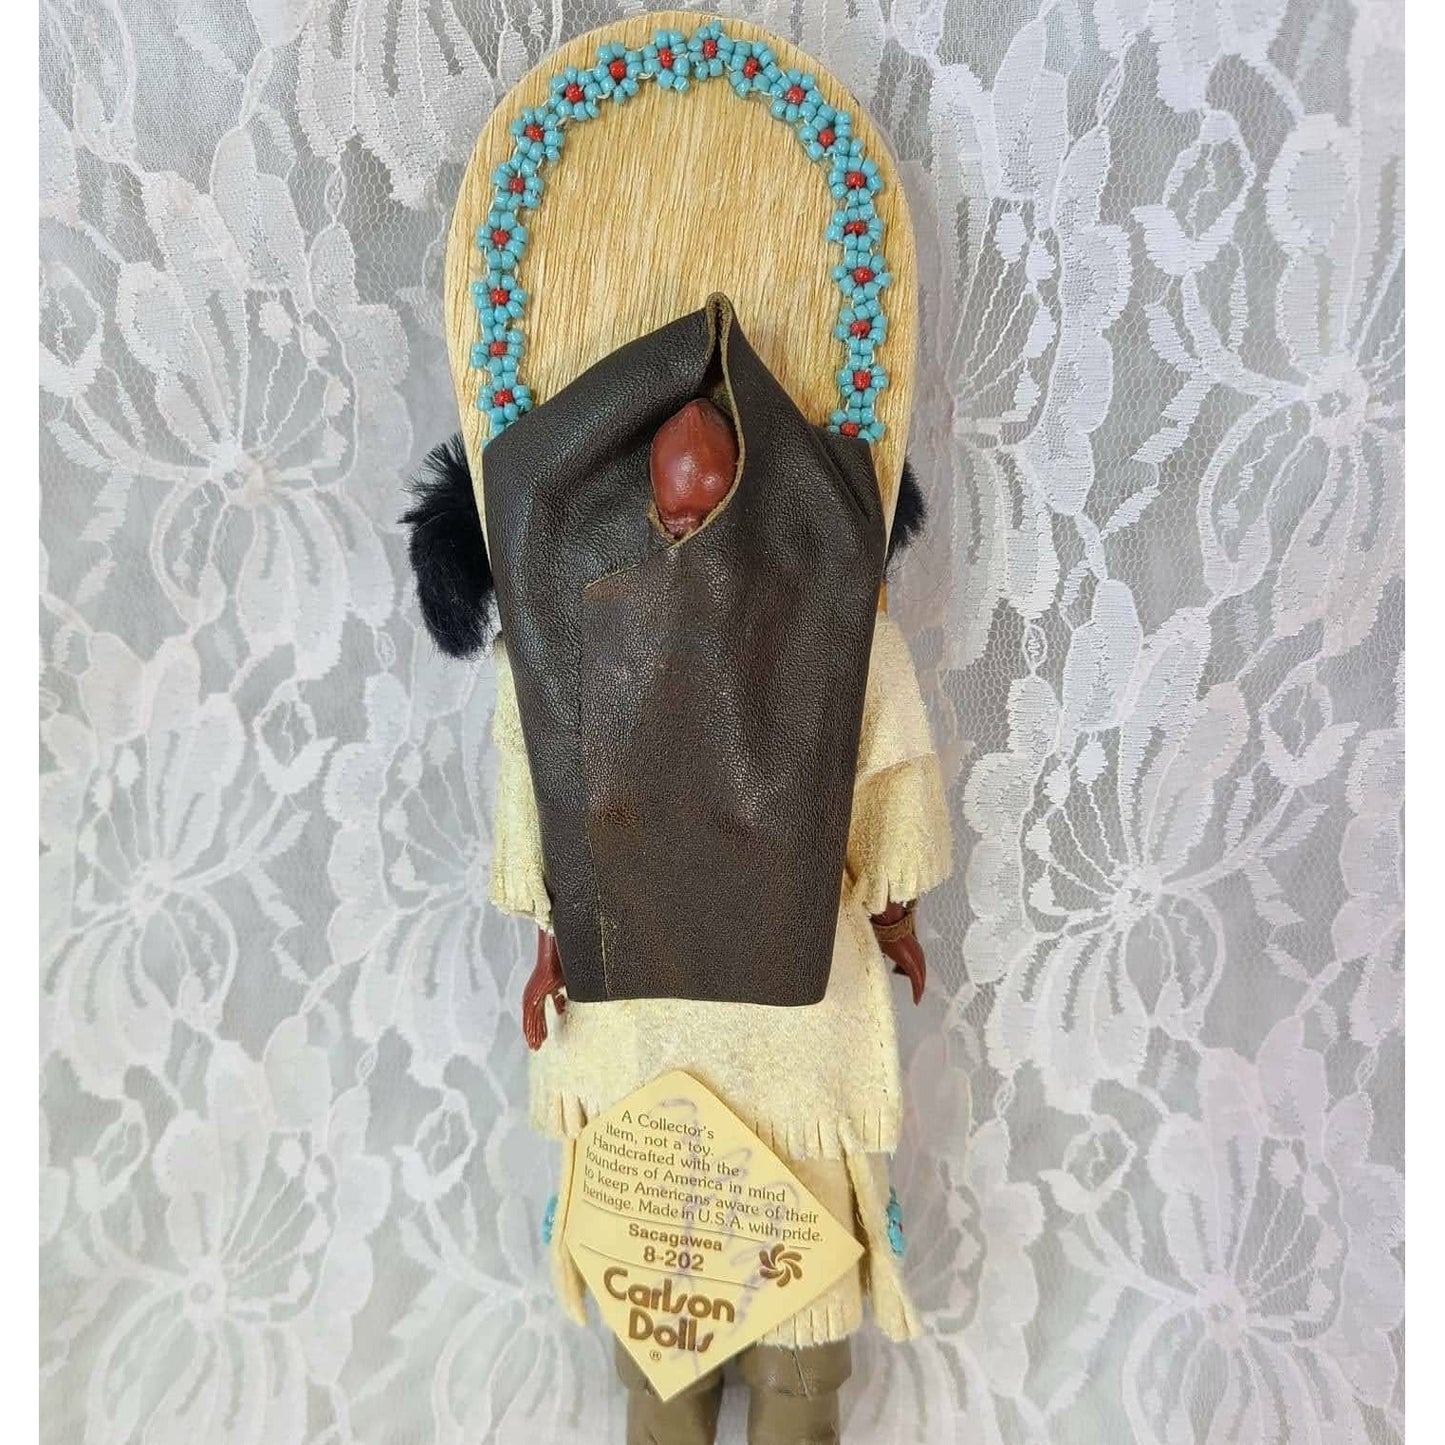 Carlson Dolls 1950s Vintage 8" Doll in Native American Outfit with Papoose ~ Real Leather and Fur, Tagged and Signed by Maker